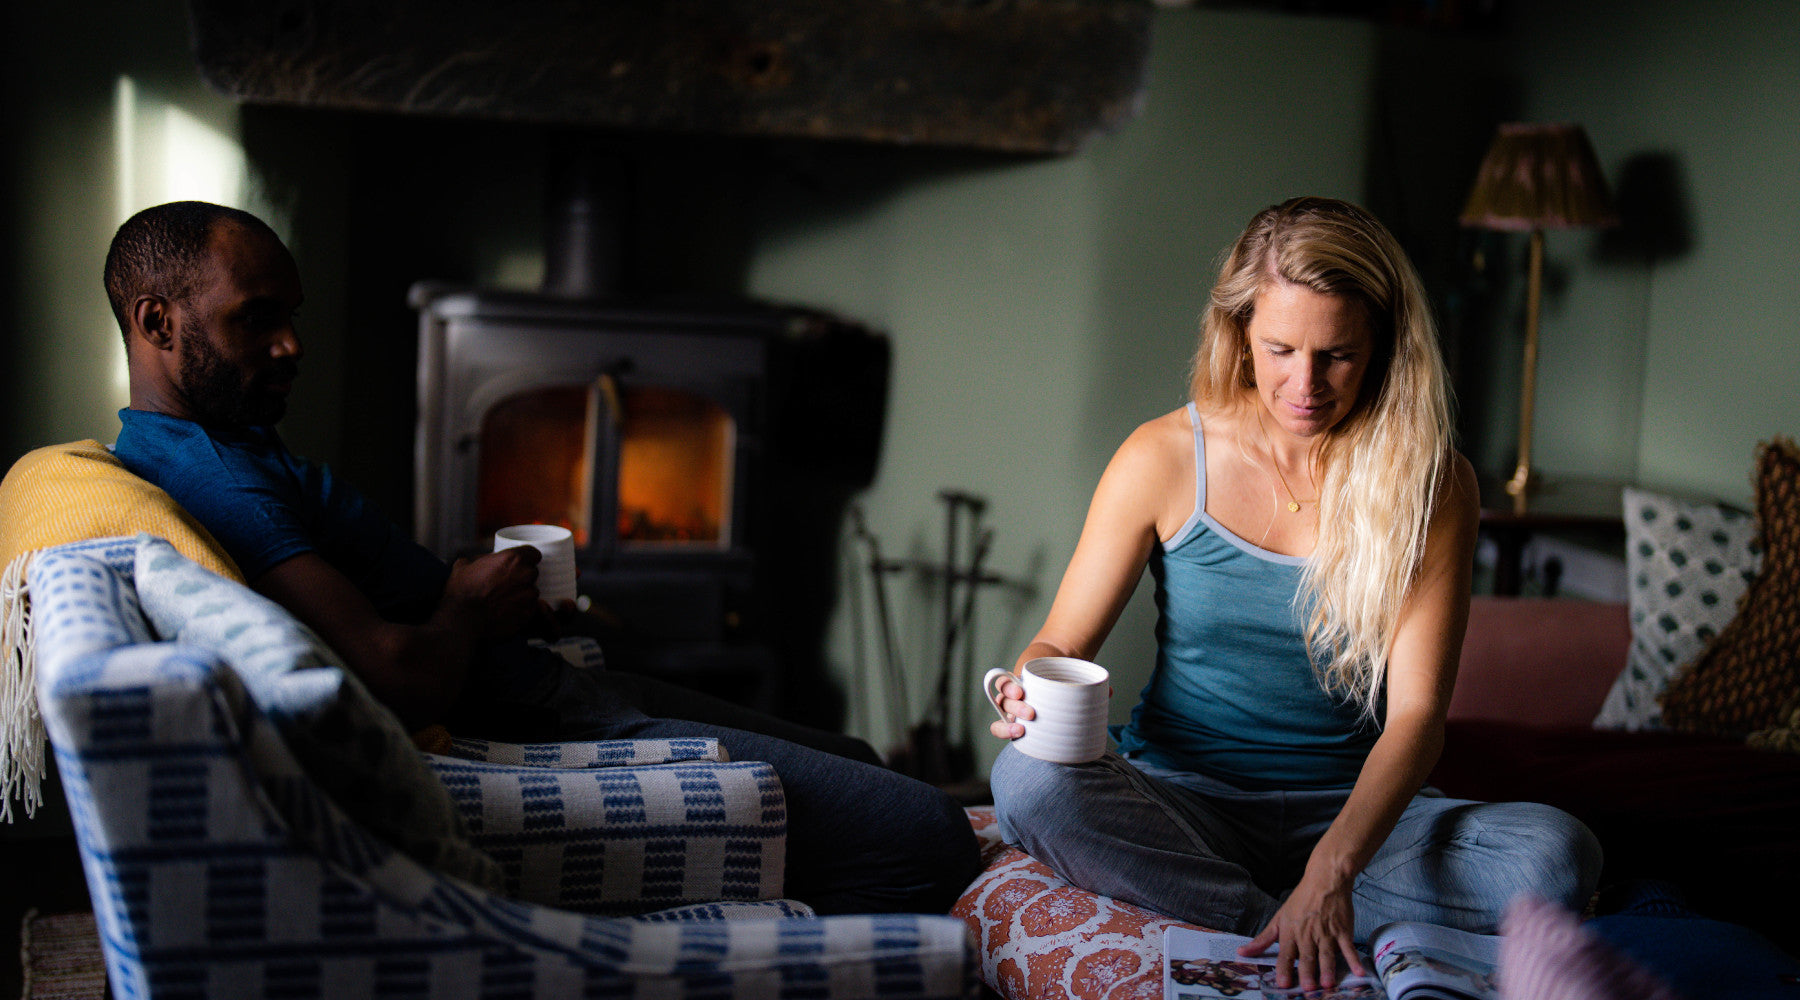 Isobaa Merino 160 PJ Cami and 200 PJ Joggers and 160 PJ T-Shirt - enjoying warm cups of tea by the fire